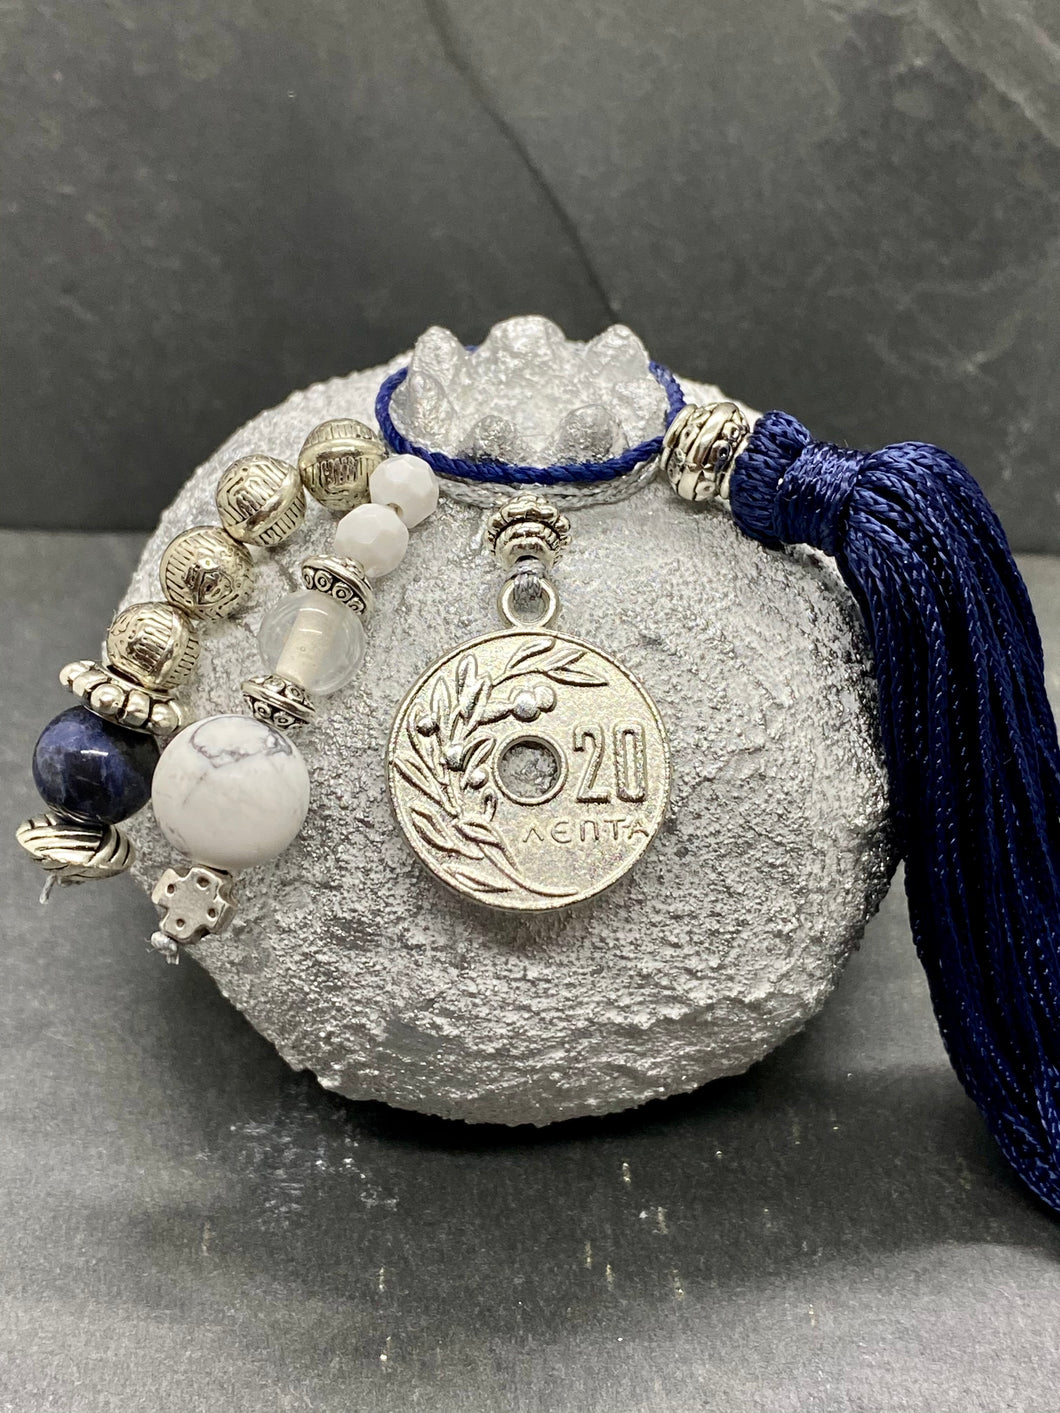 Two Tone White Silver Medium Size Ceramic Pomegranate with 20 Lepta Coin, Glass Beads and a large Tassel